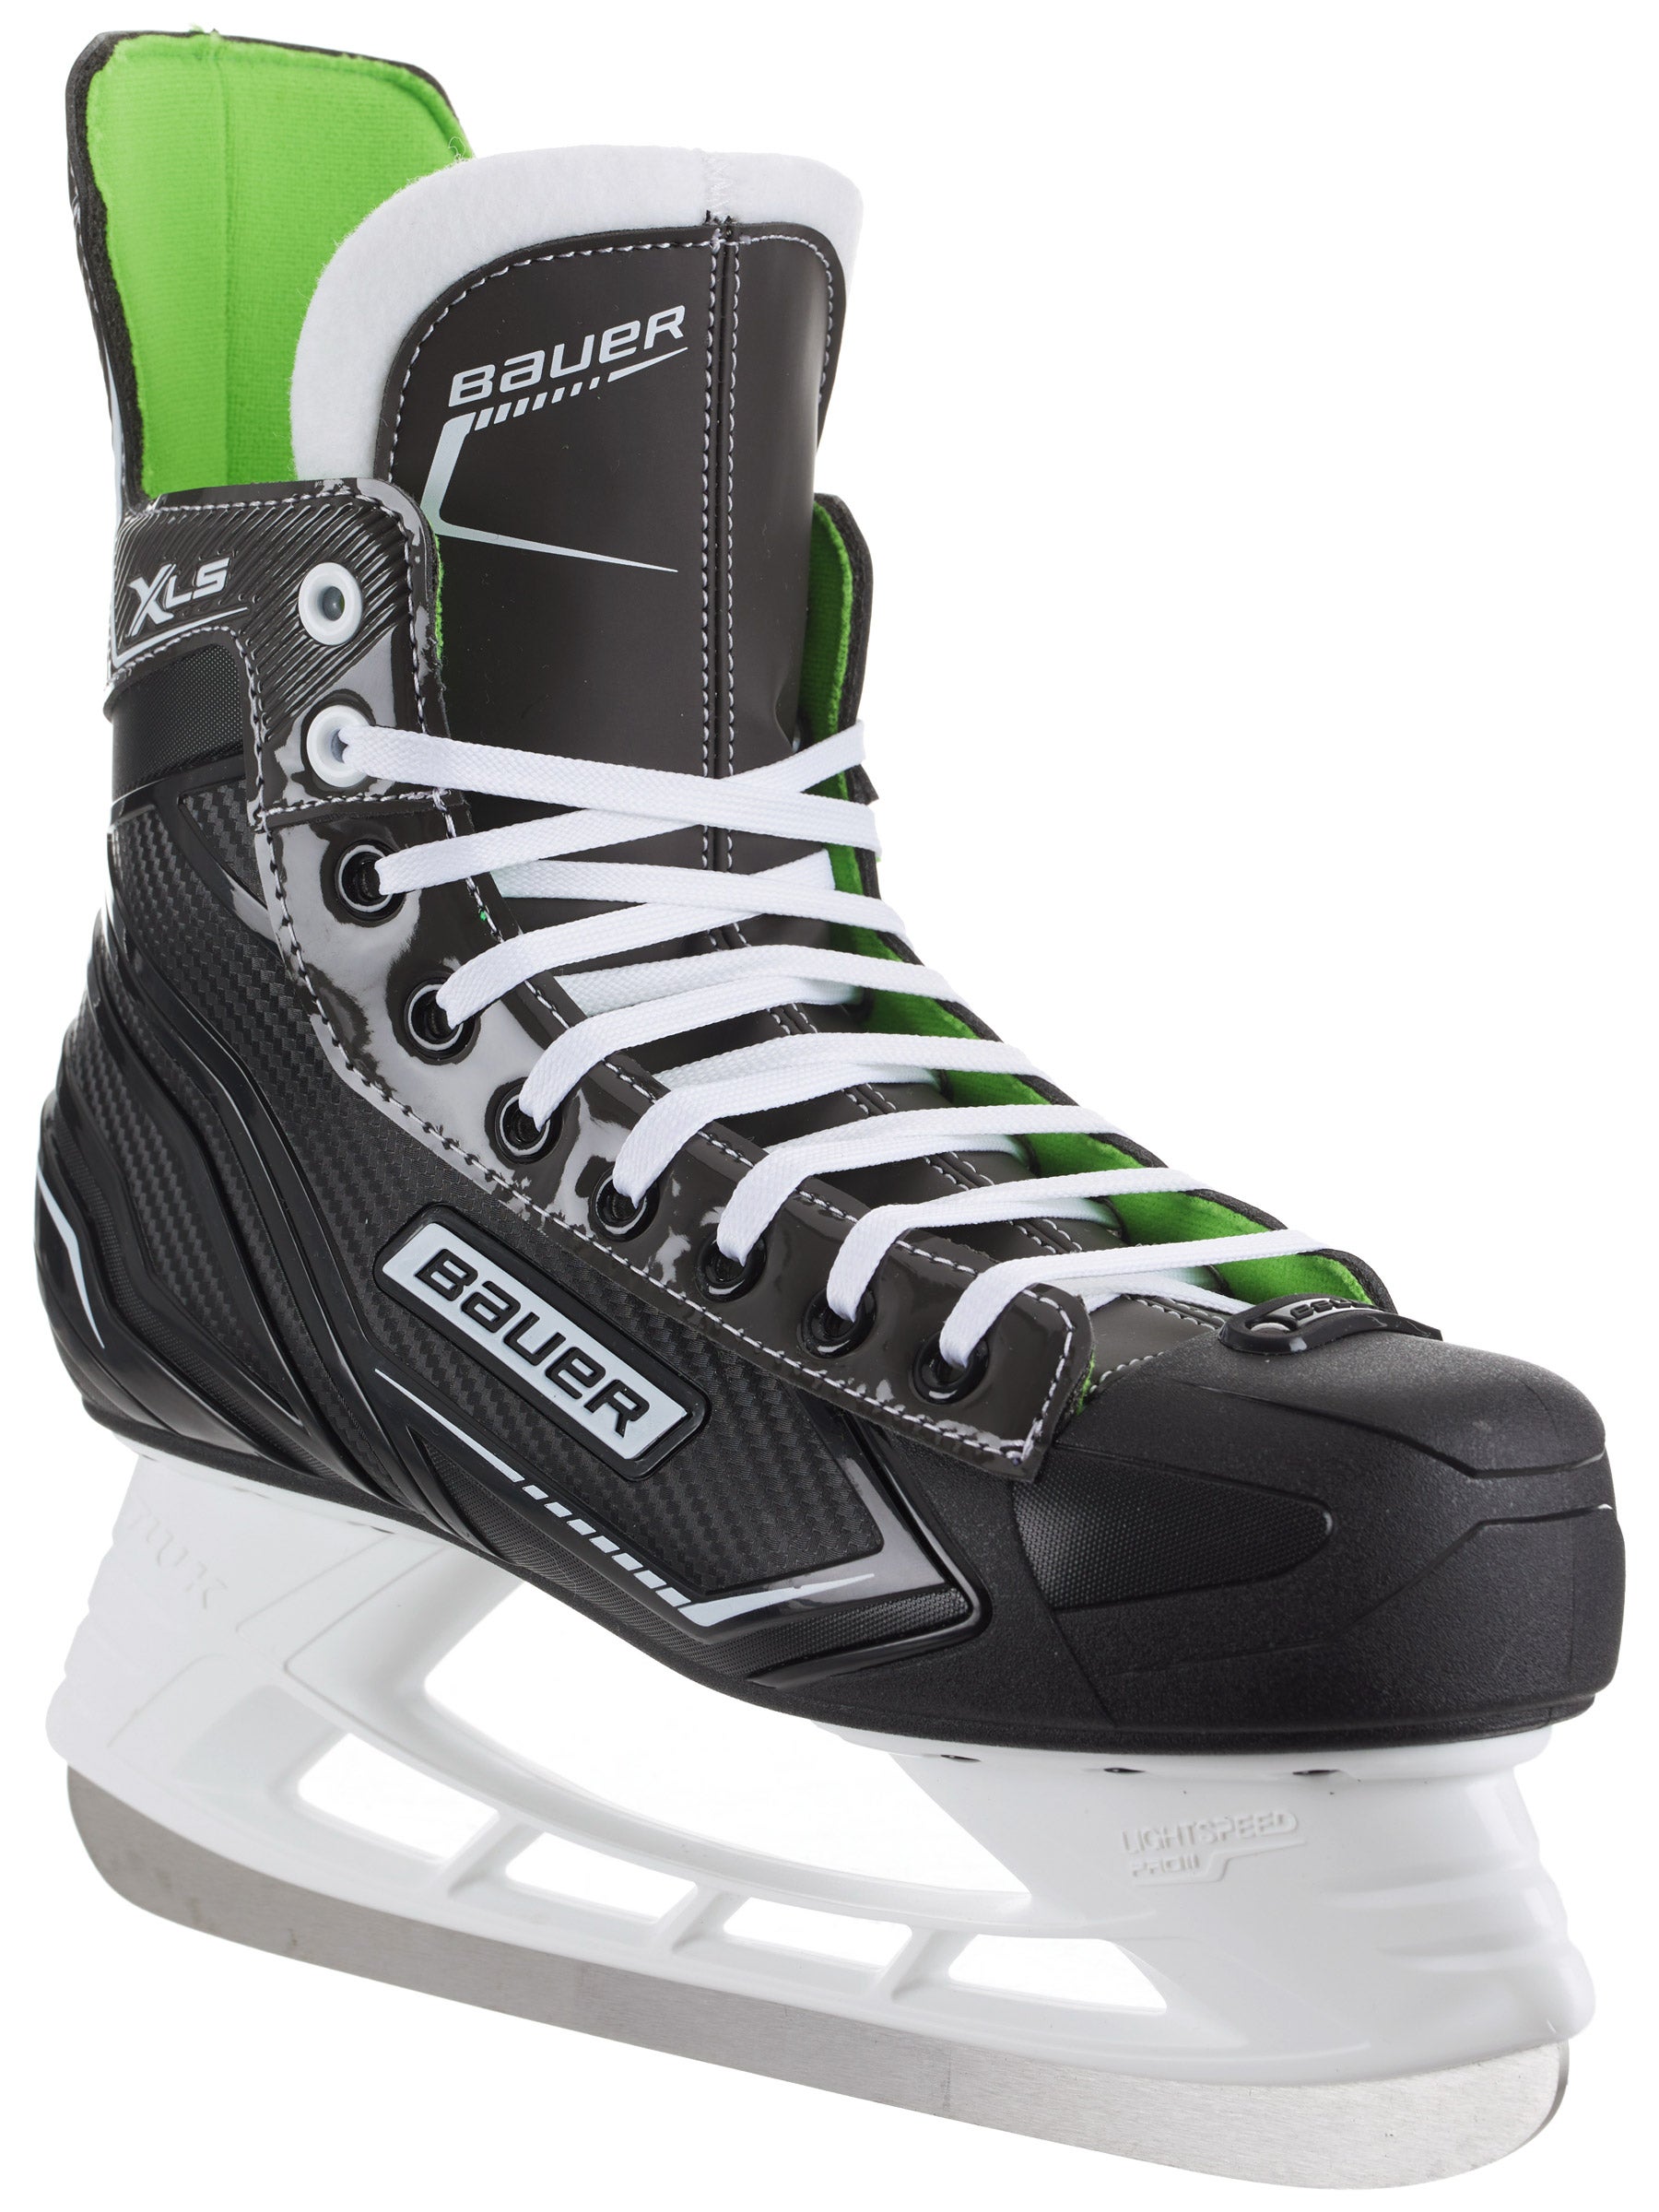 BAUER NS ICE HOCKEY SKATES NEW MODEL WITH FREE SHARPENING 